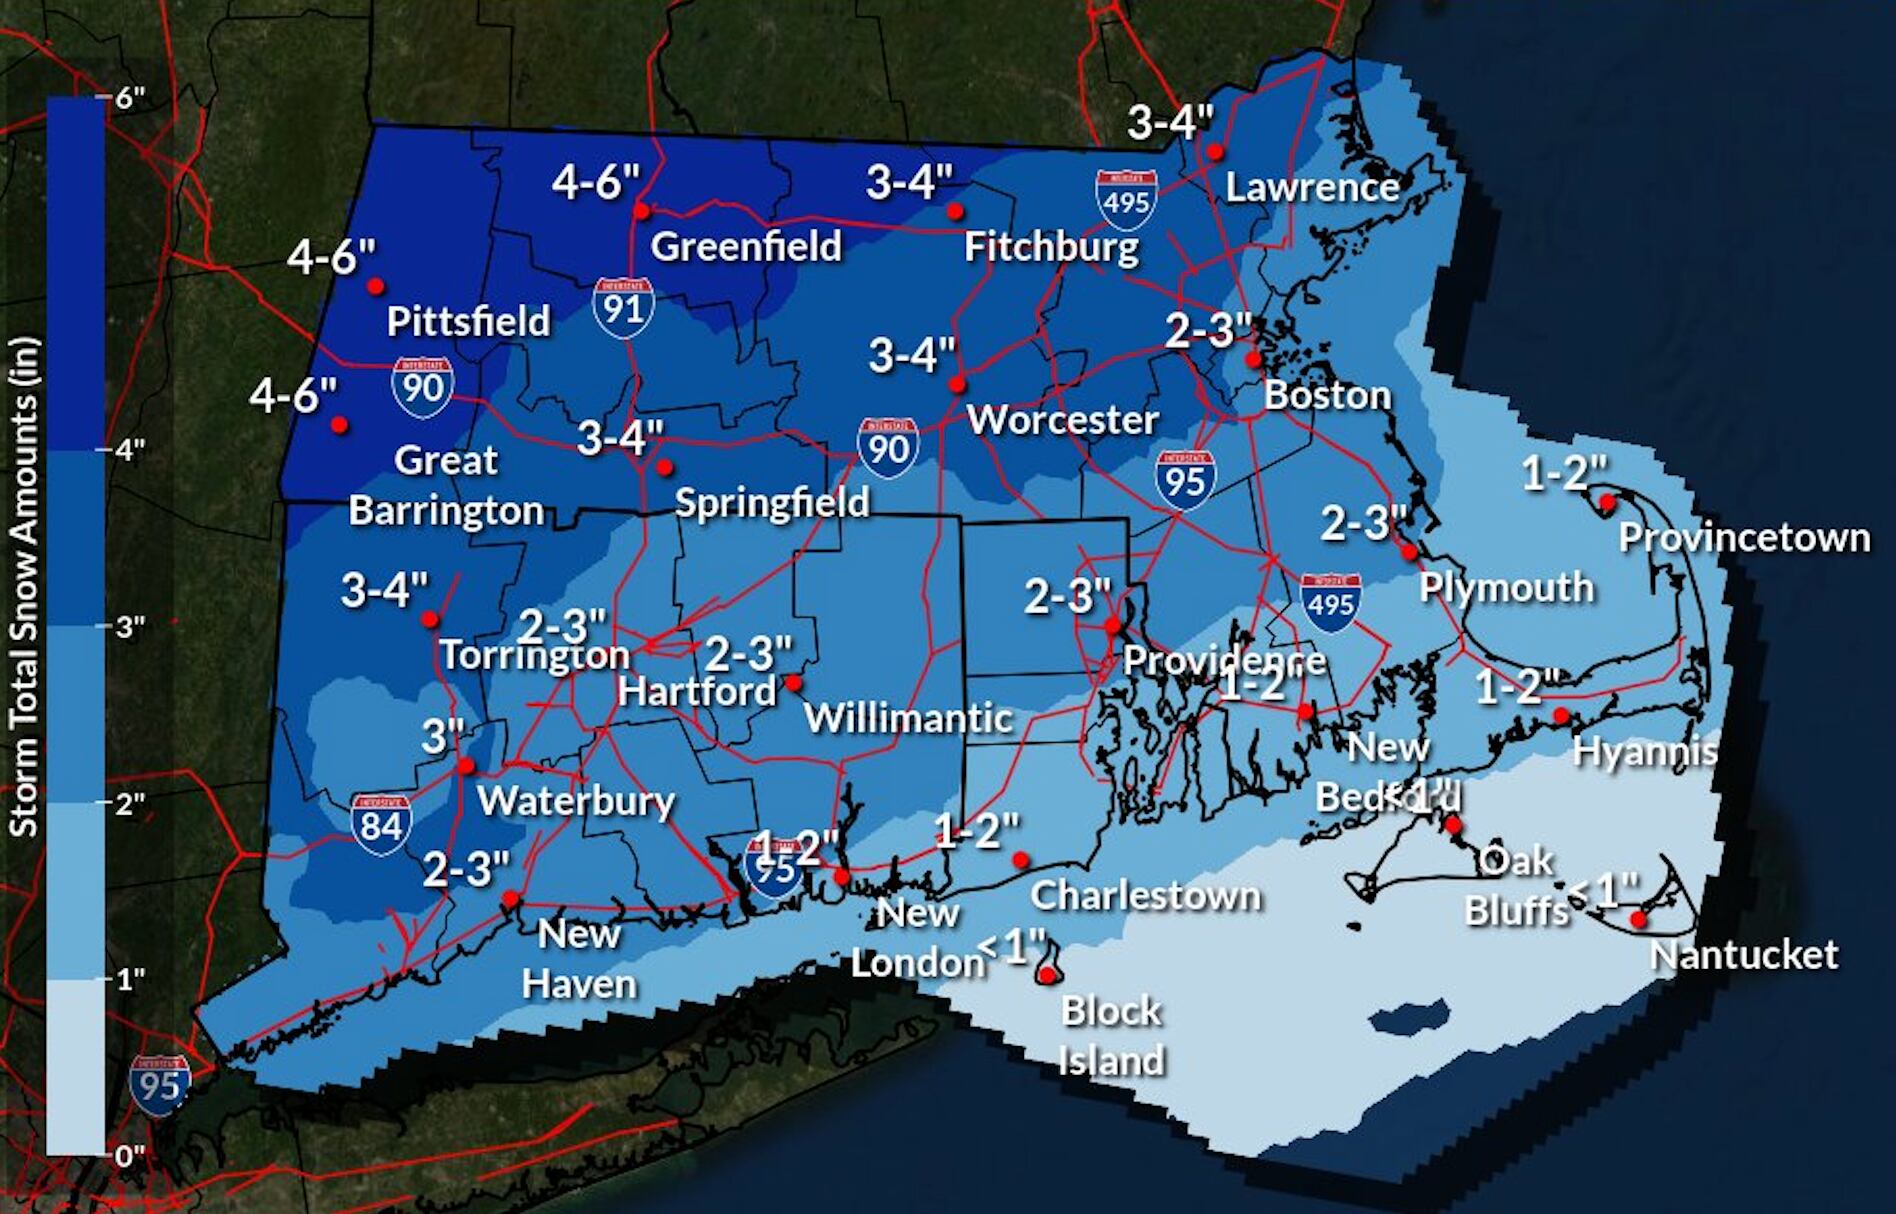 maps show forecast snow totals, timing of storm on tuesday